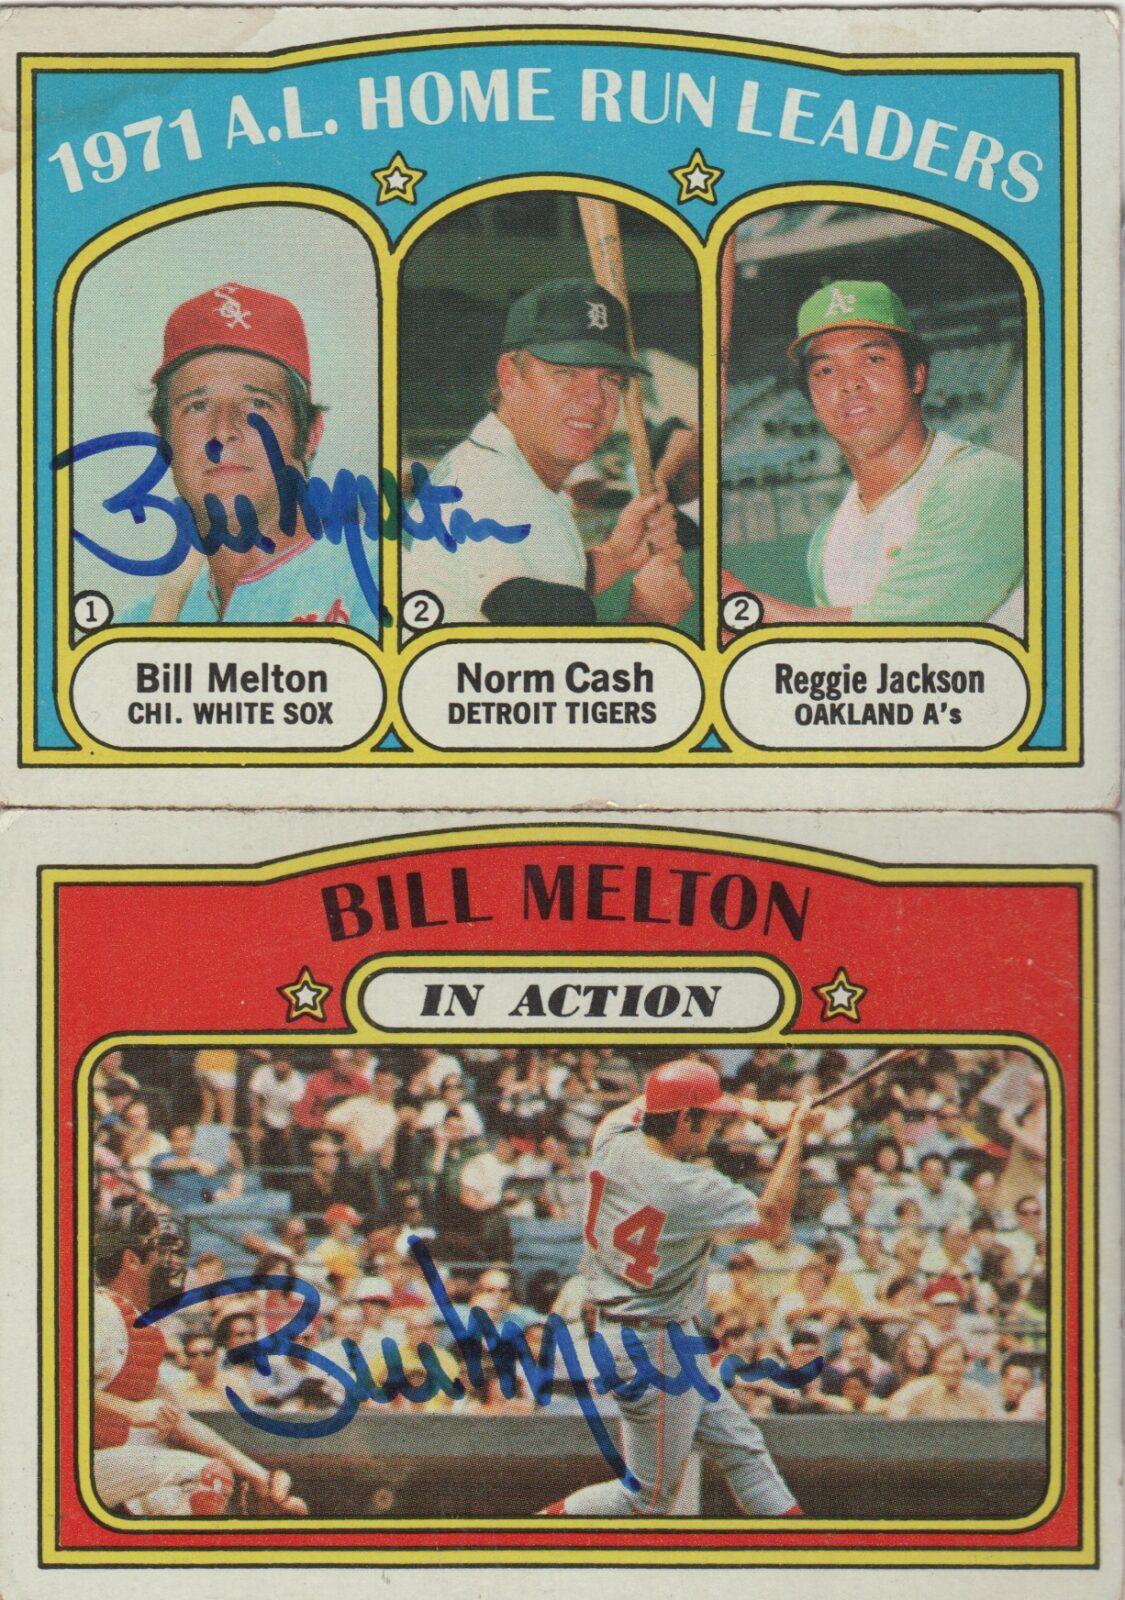 1970s Baseball - Happy Birthday to 'Beltin' Bill Melton, a 10 year major  league third baseman who topped 20 HR in a season 5 times for the Chicago White  Sox. Melton hit